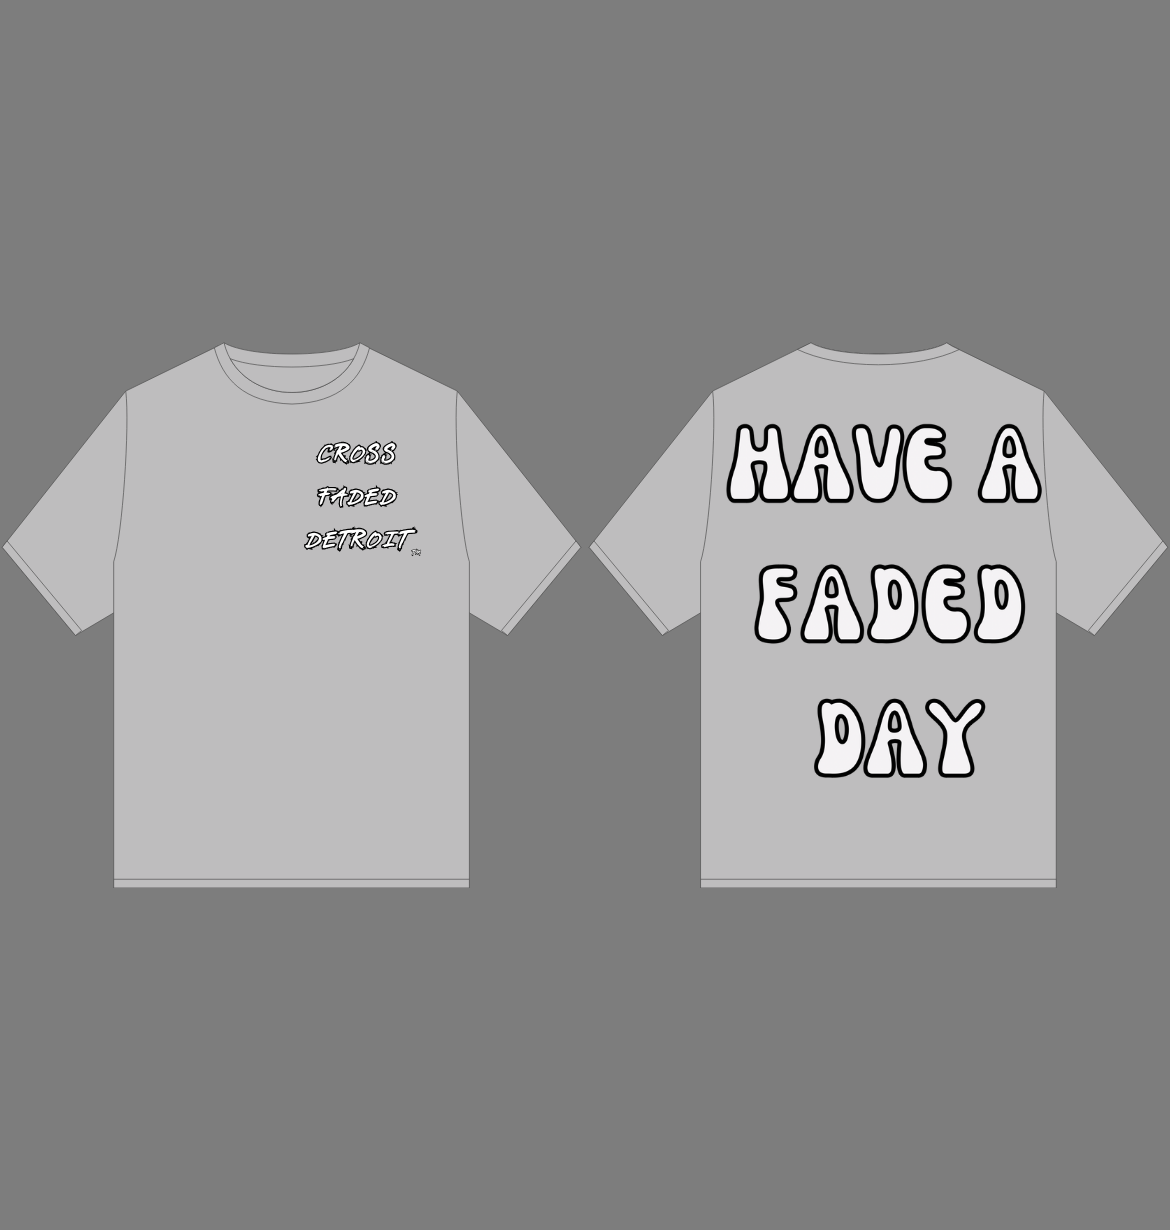 HAVE A FADED DAY Classic Tee